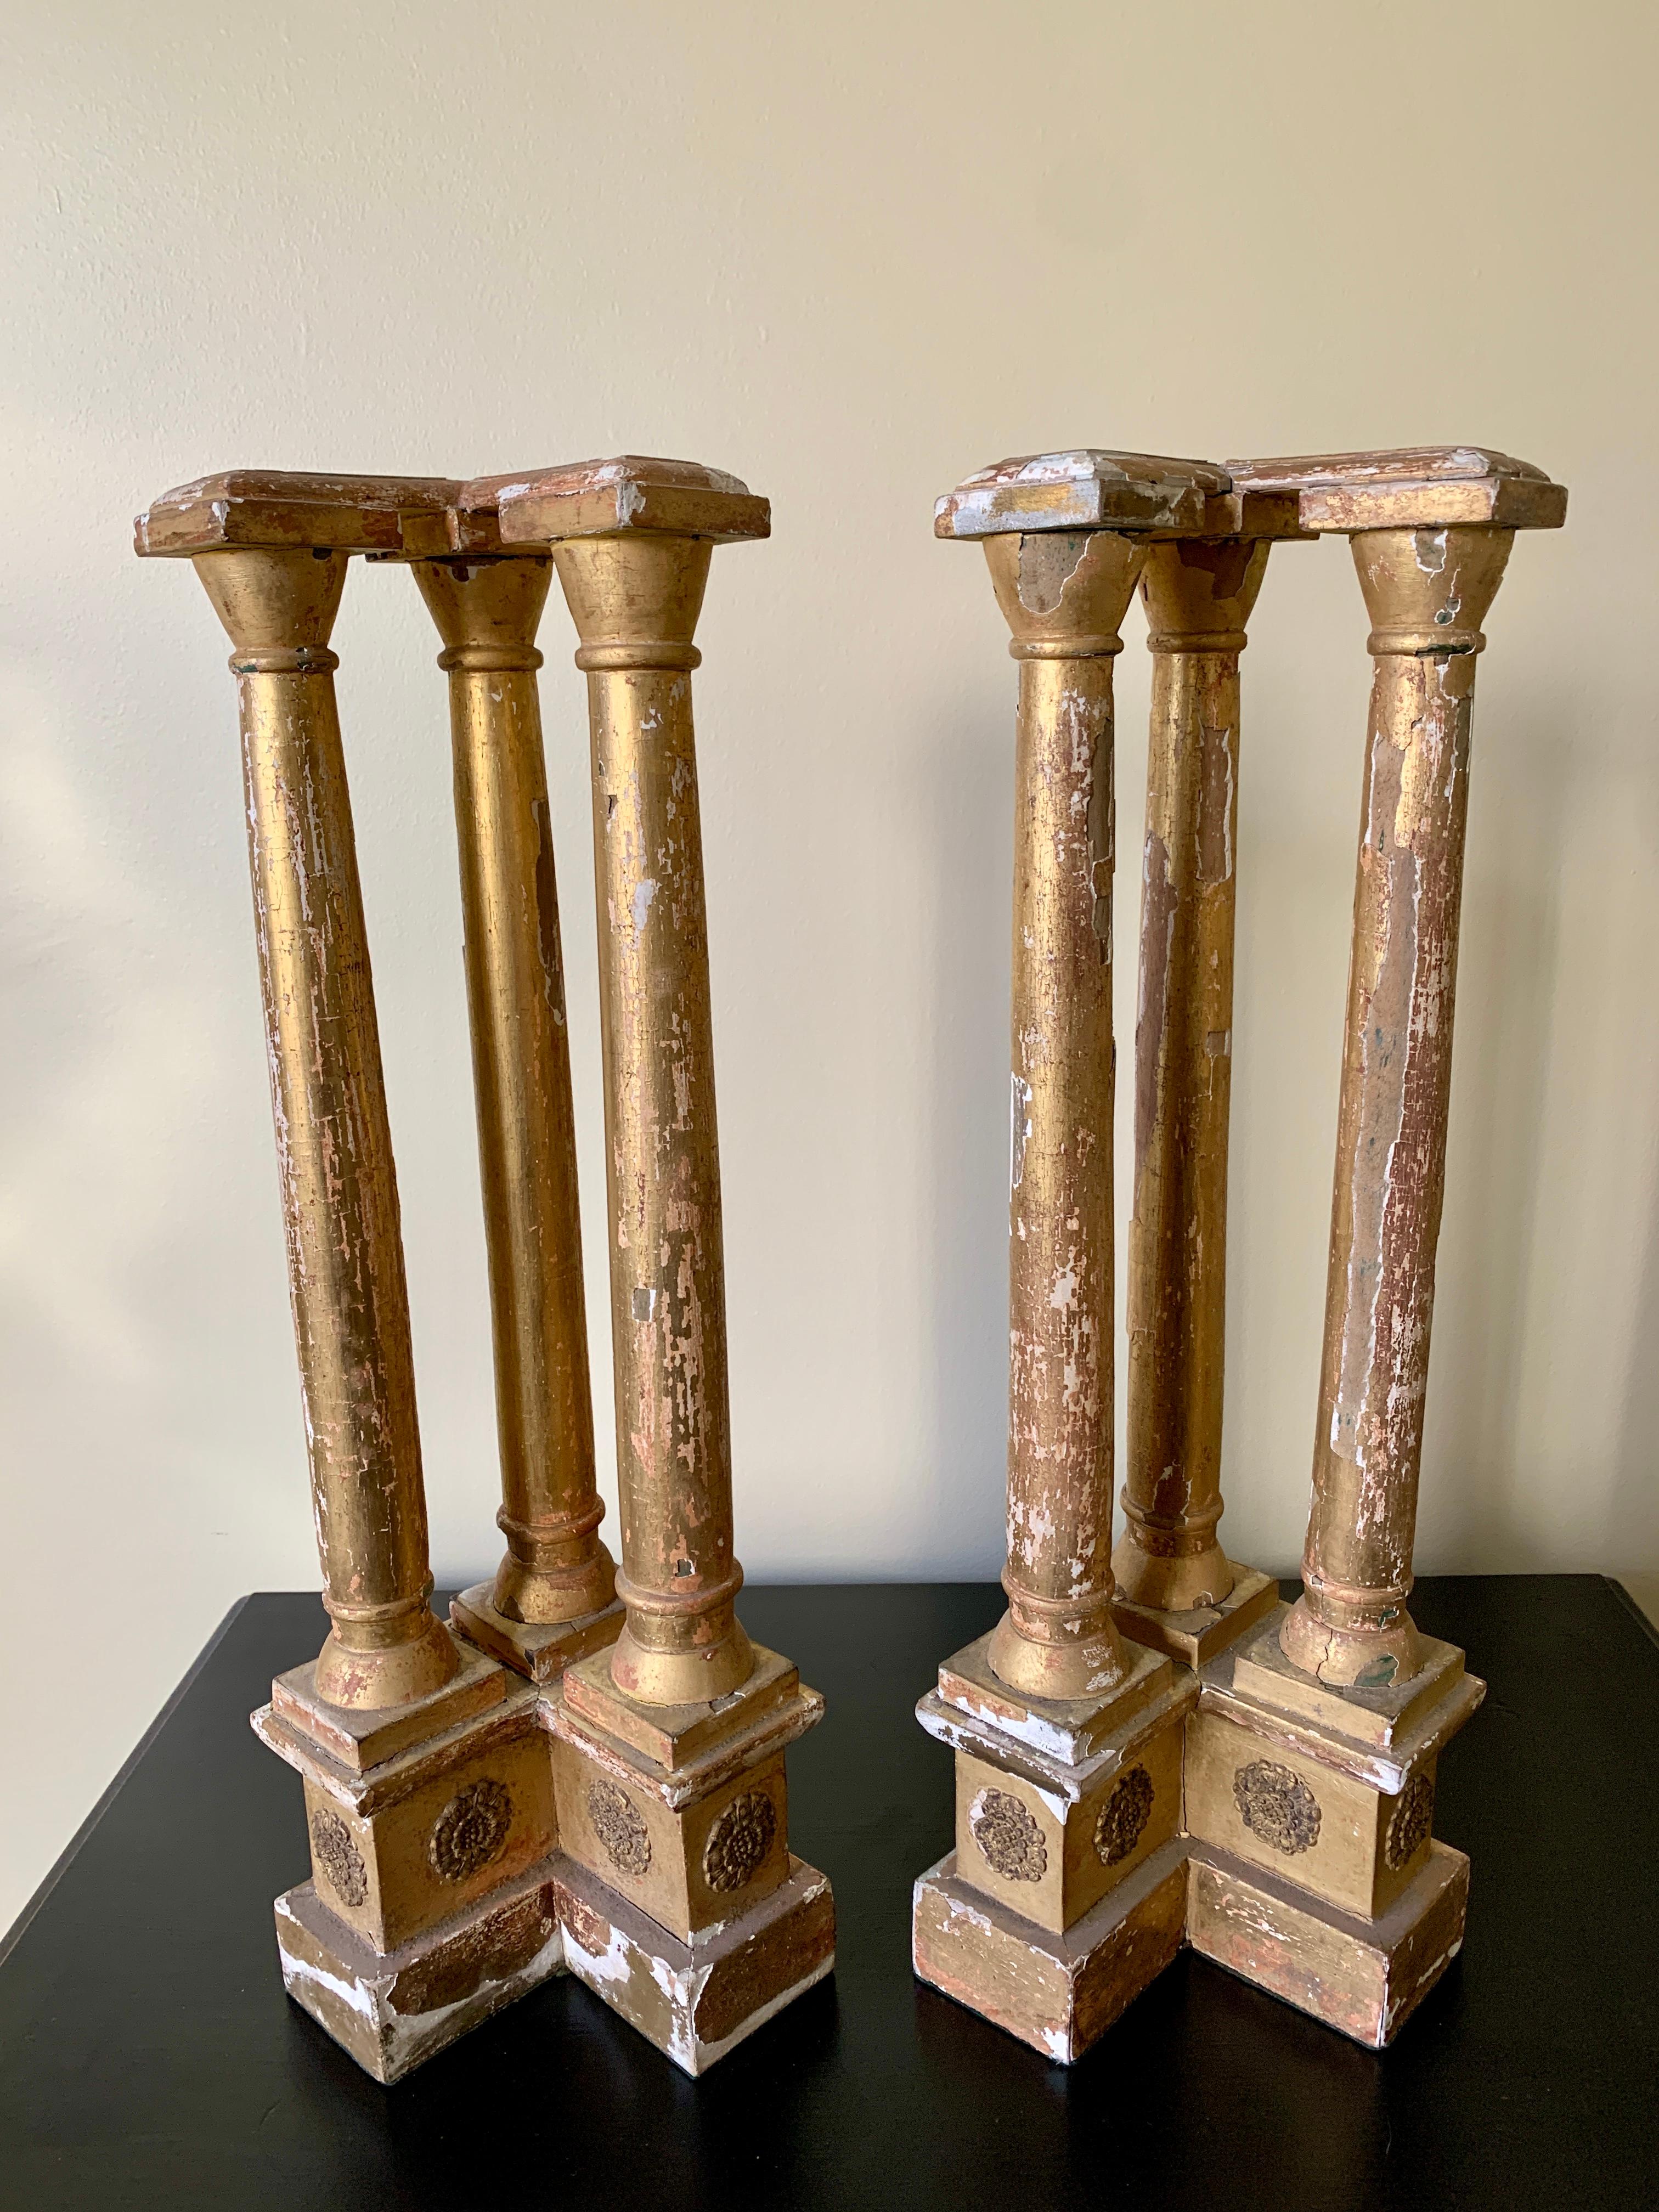 Antique Neoclassical Grand Tour Giltwood Architectural Columns, a Pair For Sale 6